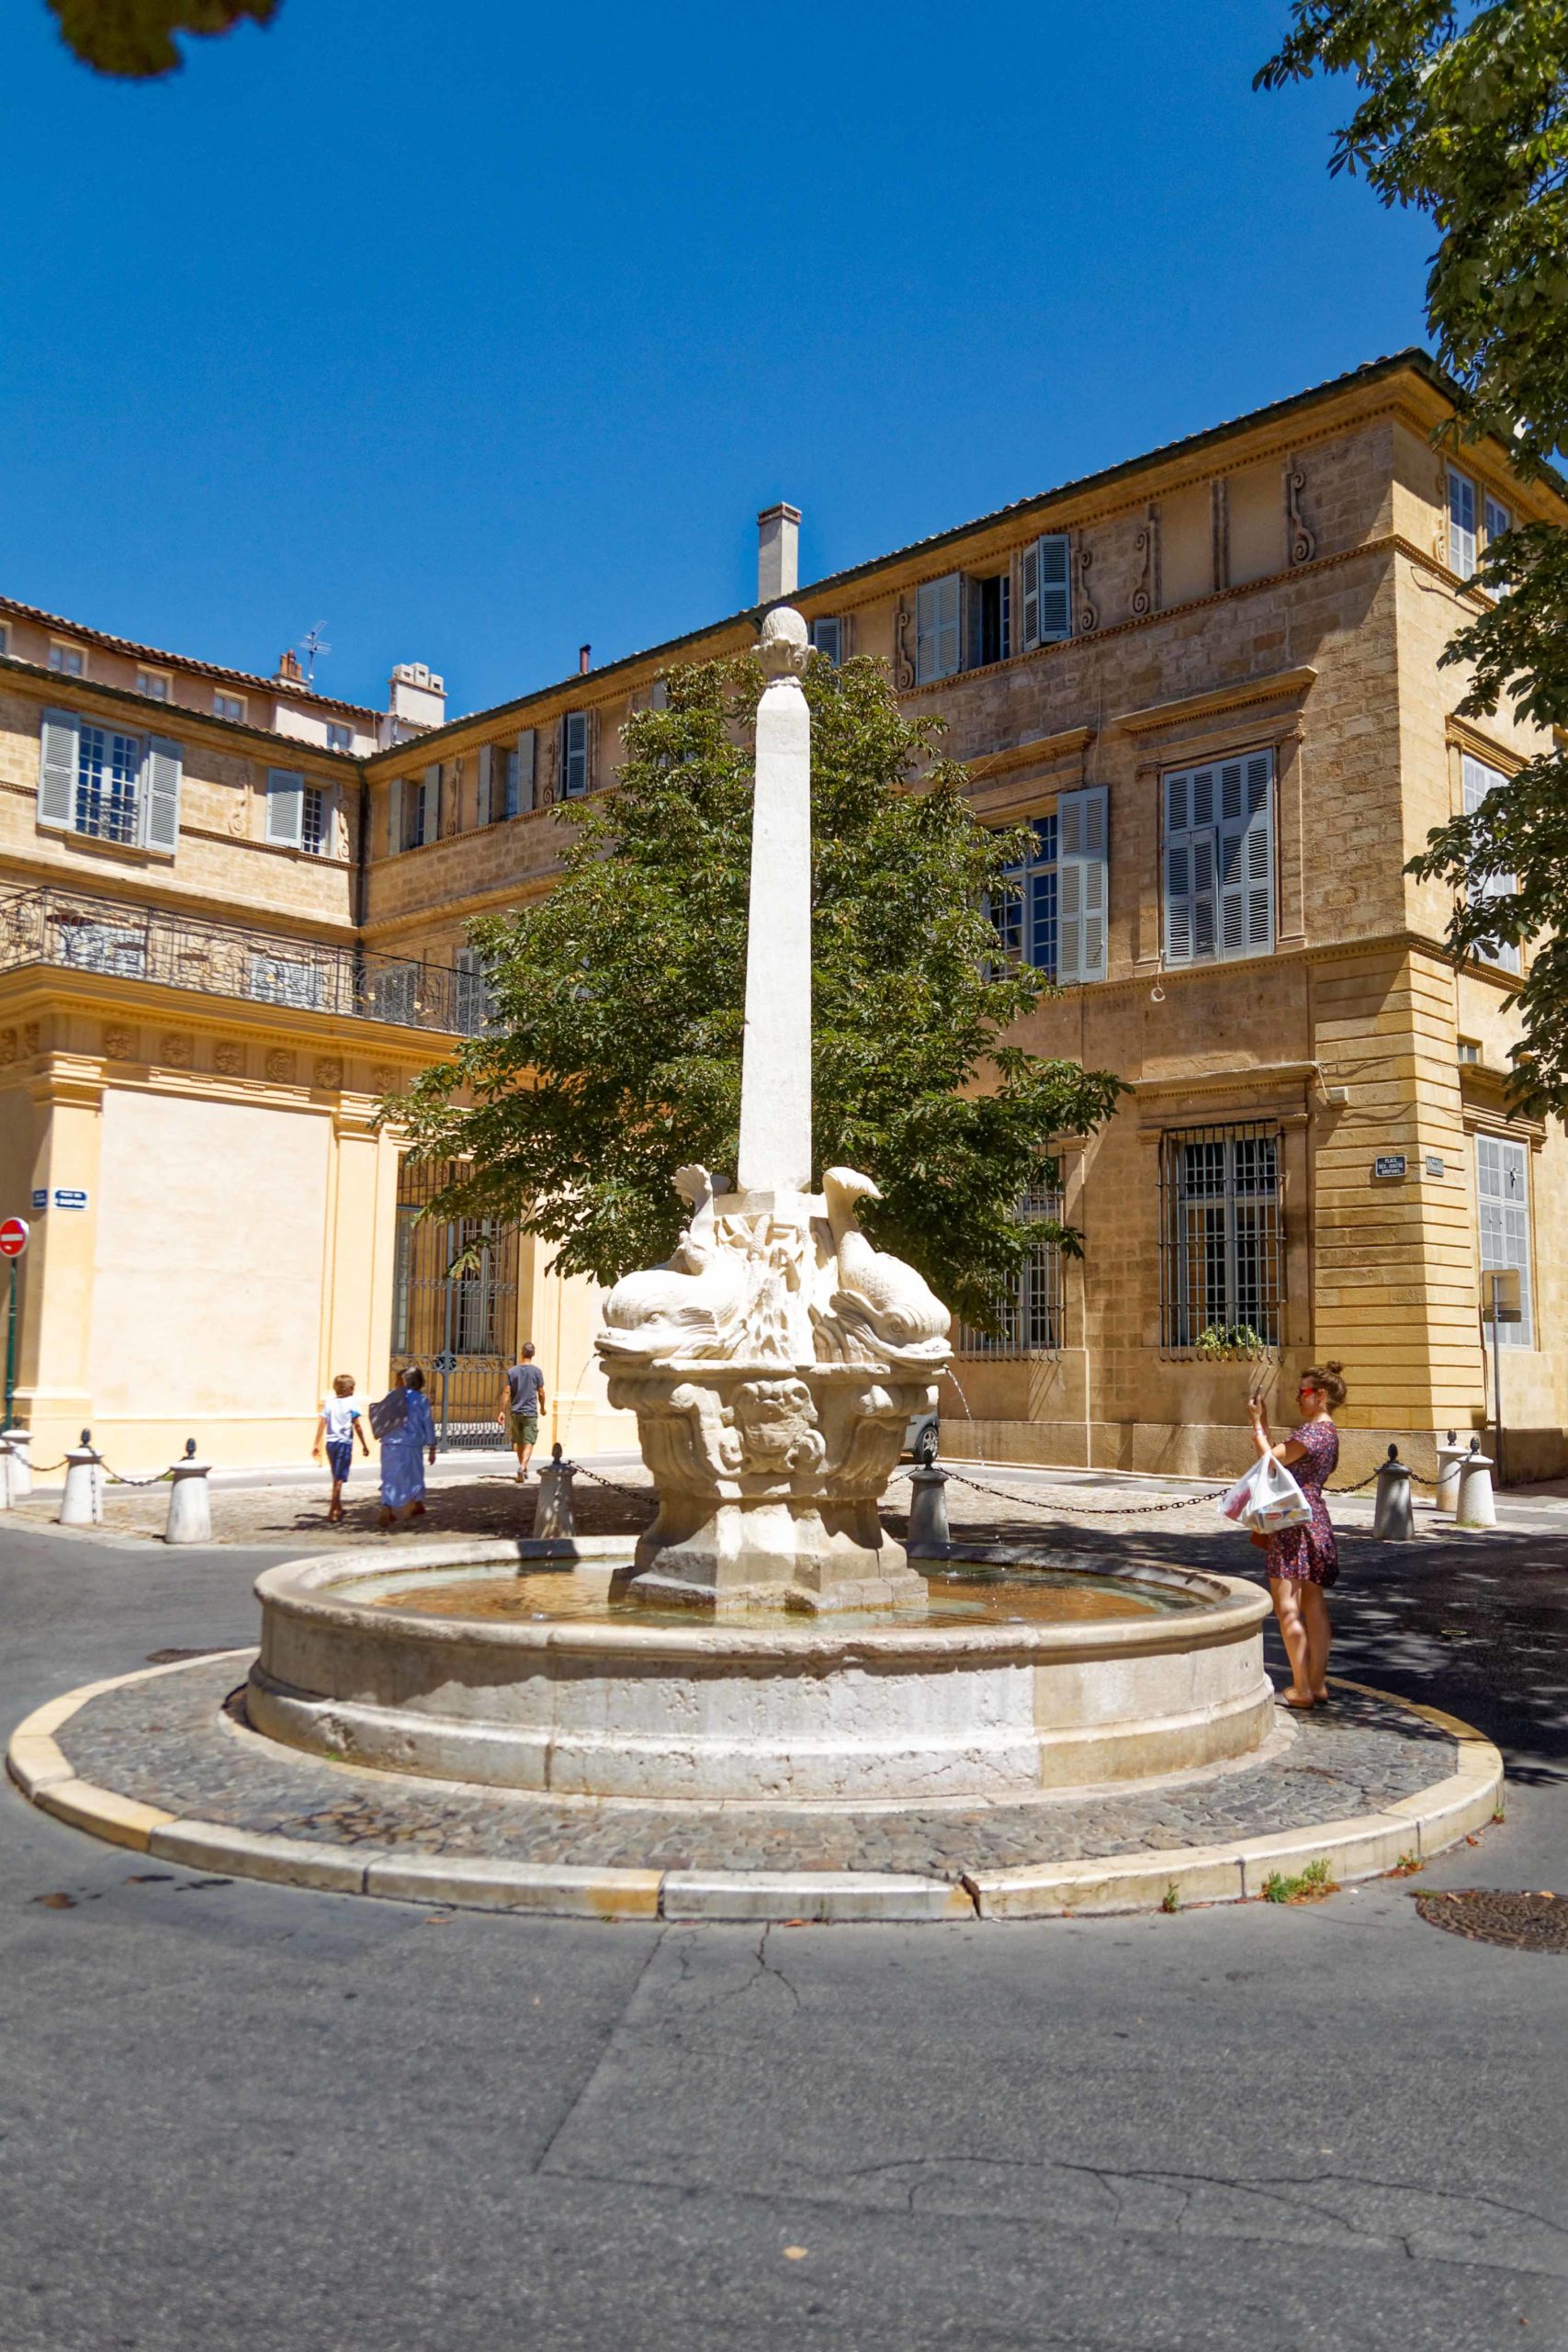 Aix-en-Provence old town - Fontaine des Quatre-Dauphins © Bjs - licence [CC BY-SA 4.0] from Wikimedia Commons